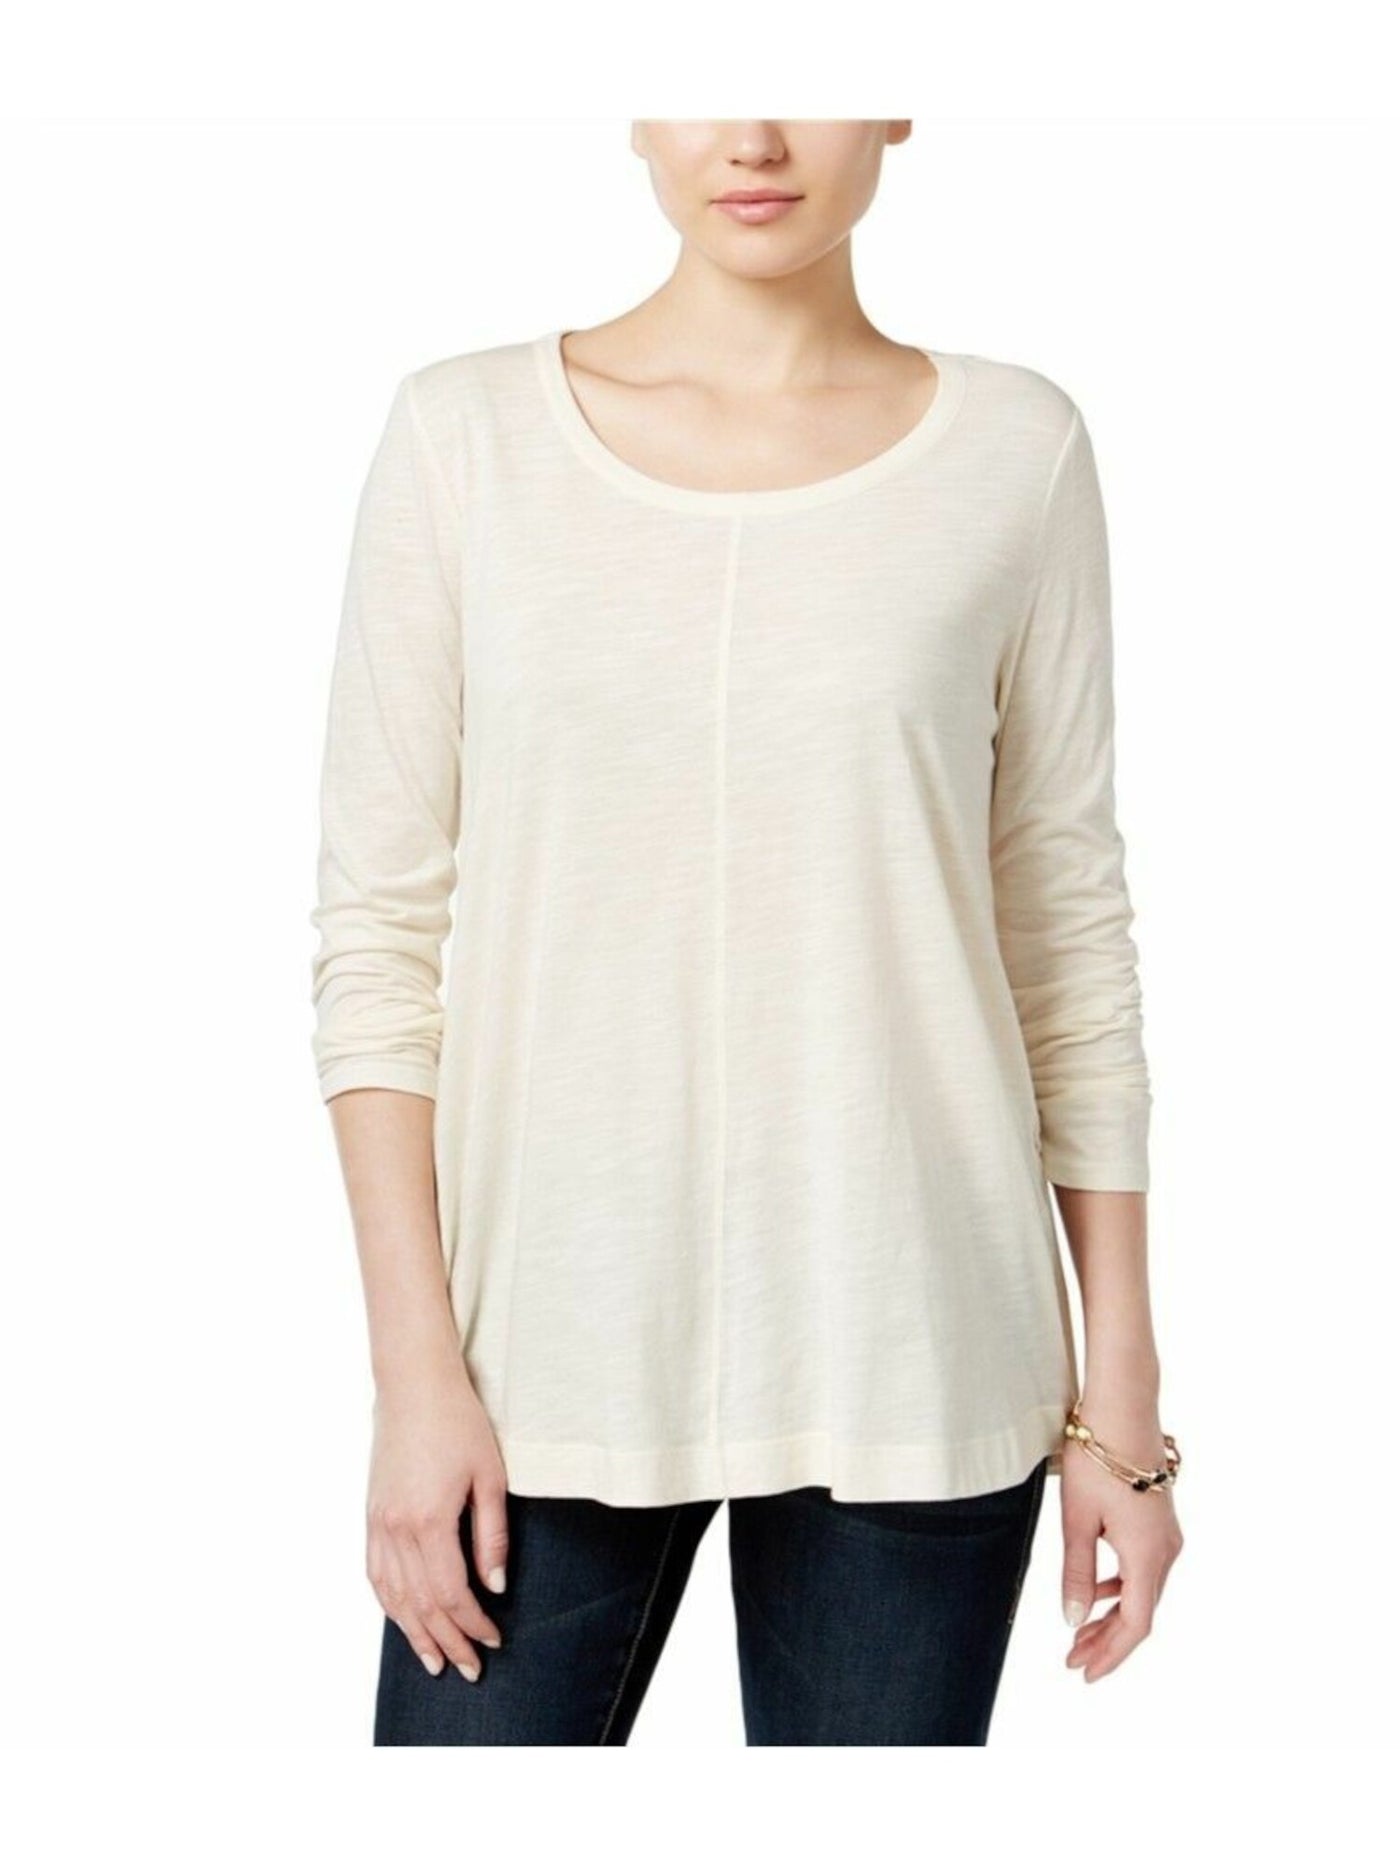 STYLE & COMPANY Womens Ivory Long Sleeve Scoop Neck Hi-Lo Top S